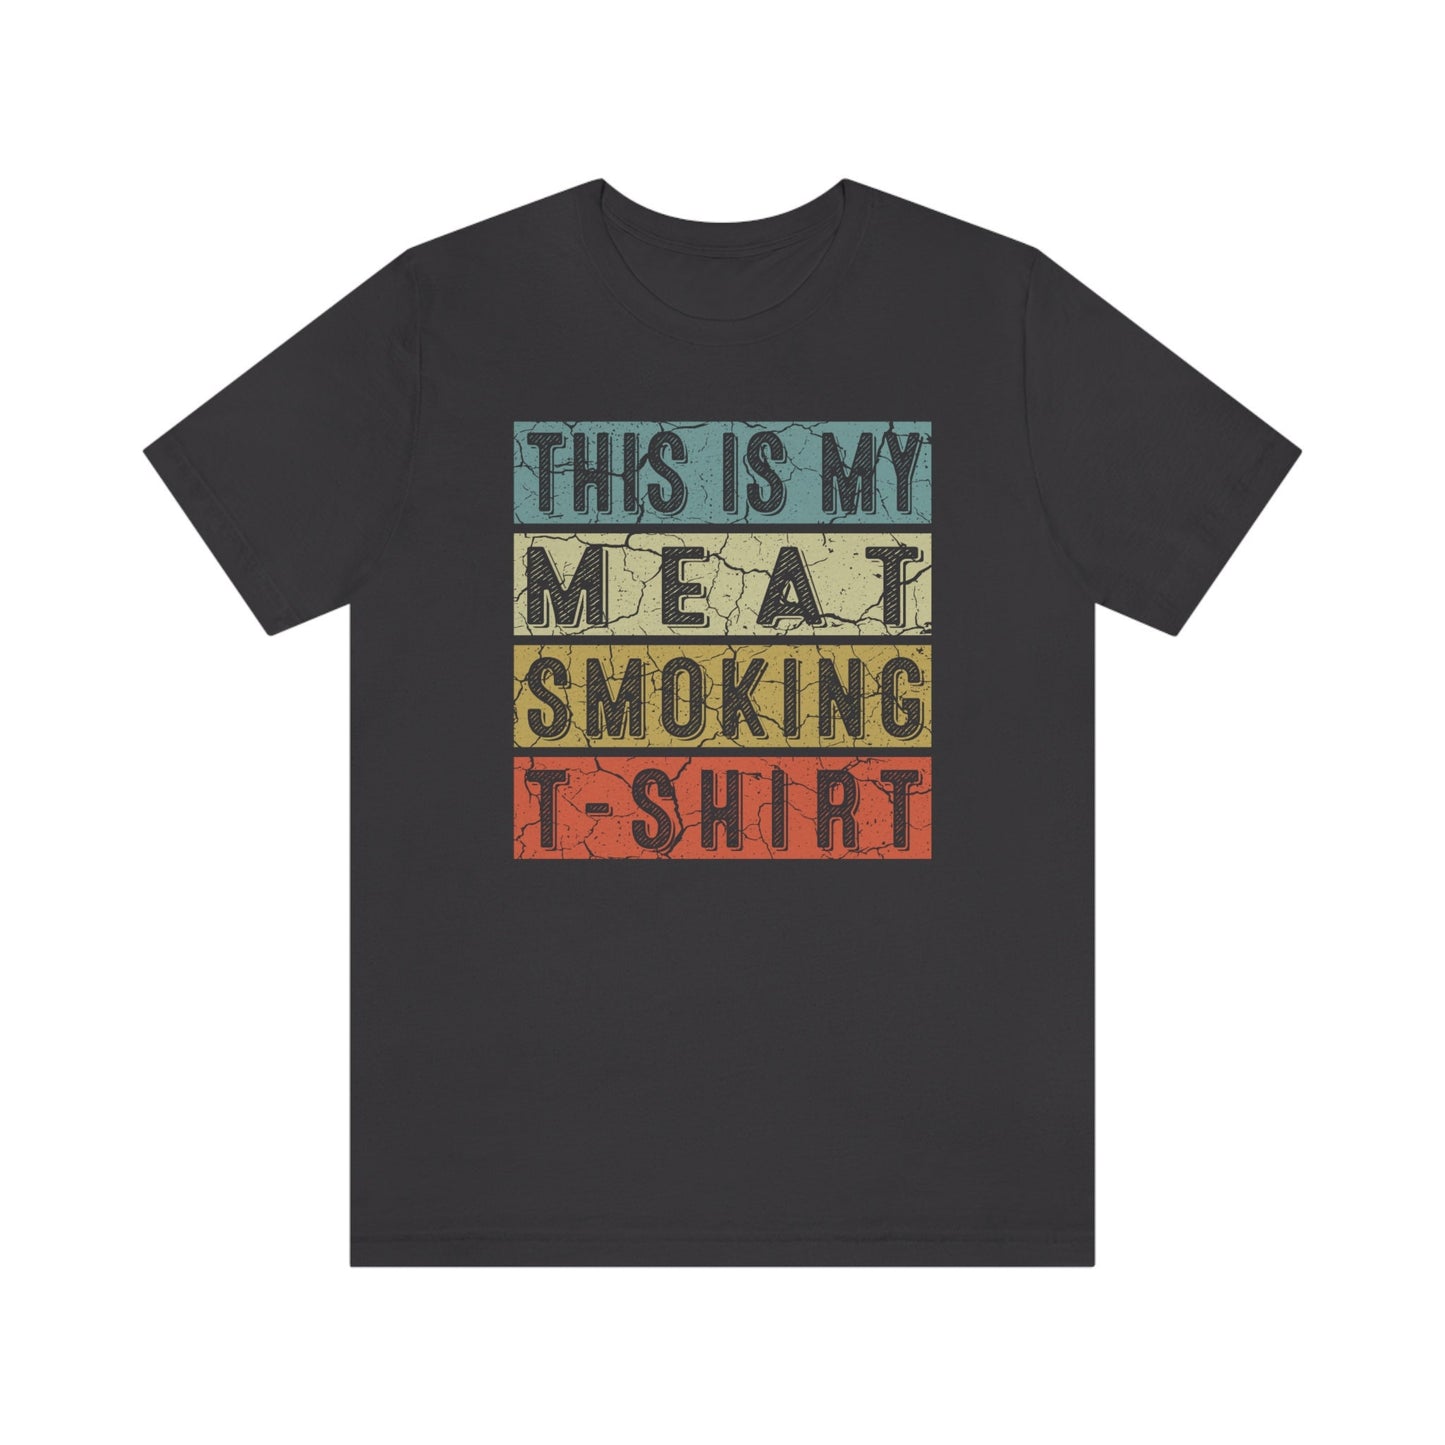 This is My Meat Smoking t-shirt - great gift for smoker who loves to cook cool brisket